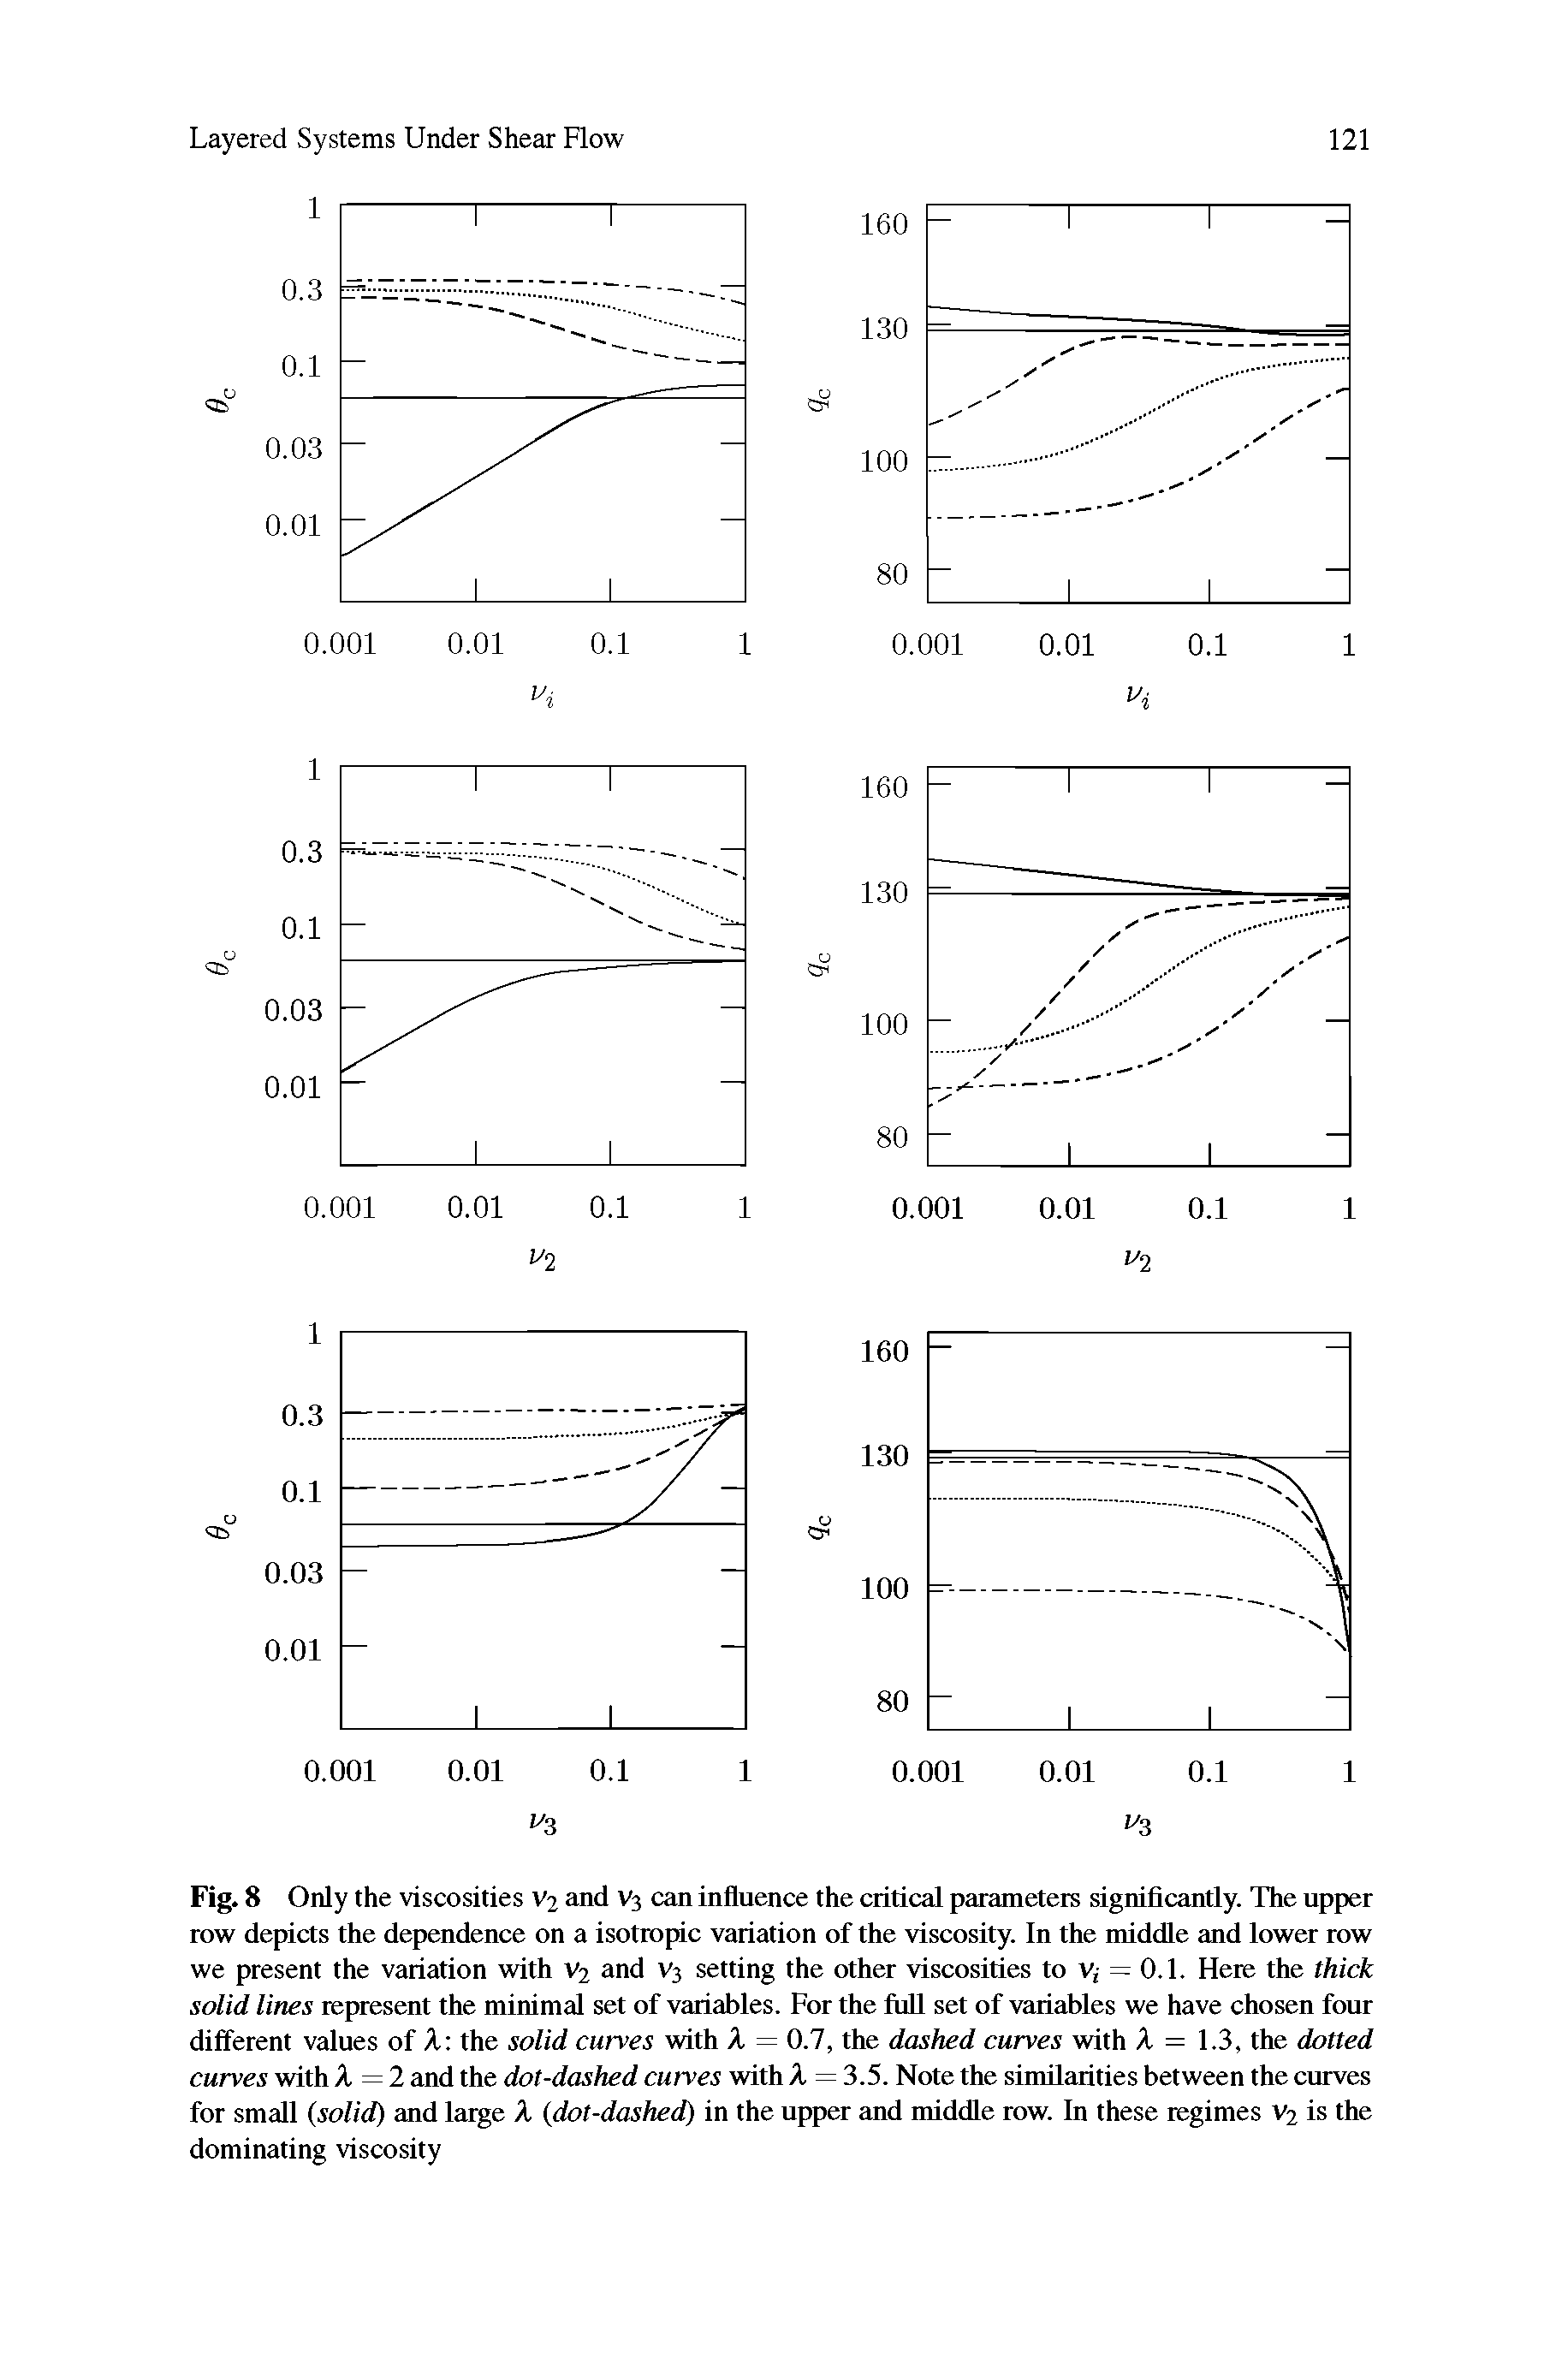 Fig. 8 Only the viscosities Vj and V3 can influence the critical parameters significantly. The upper row depicts the dependence on a isotropic variation of the viscosity. In the middle and lower row we present the variation with v2 and V3 setting the other viscosities to v, = 0.1. Here the thick solid lines represent the minimal set of variables. For the full set of variables we have chosen four different values of X the solid curves with X = 0.7, the dashed curves with X = 1.3, the dotted curves with X = 2 and the dot-dashed curves with X = 3.5. Note the similarities between the curves for small (solid) and large X (dot-dashed) in the upper and middle row. In these regimes v2 is the dominating viscosity...